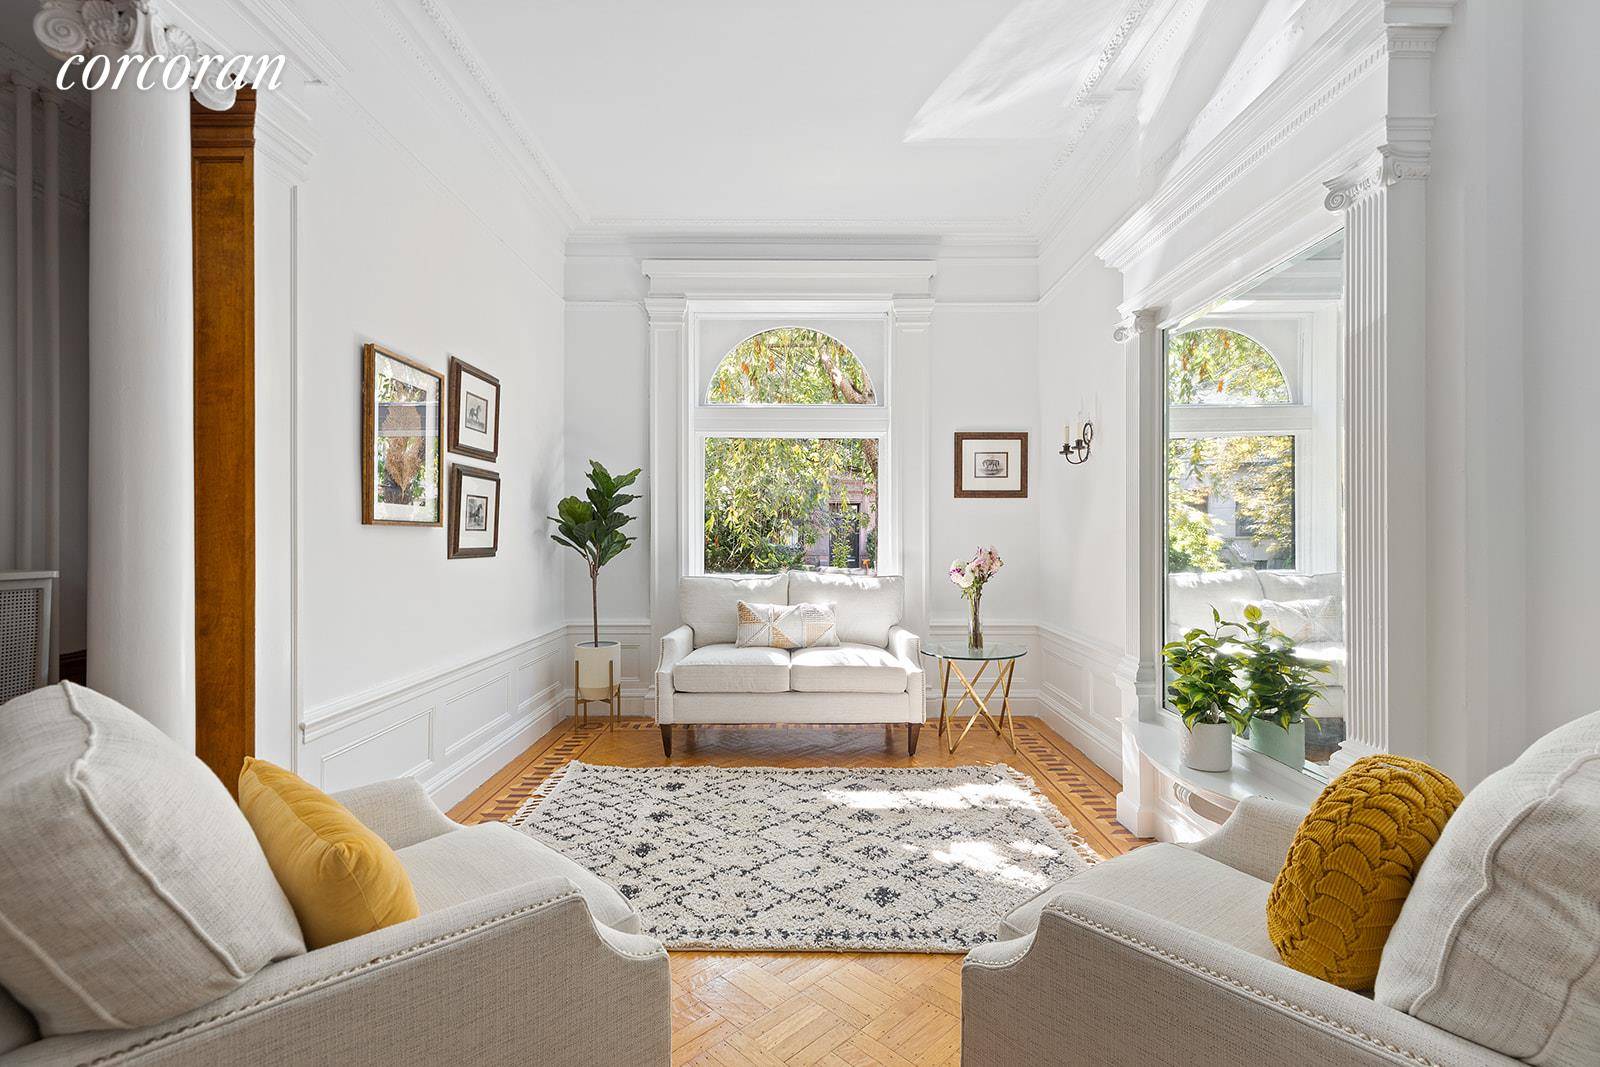 Rare circa 1900 single family townhouse in Park Slope, dripping in period details and lovingly maintained over the decades by the same owners.